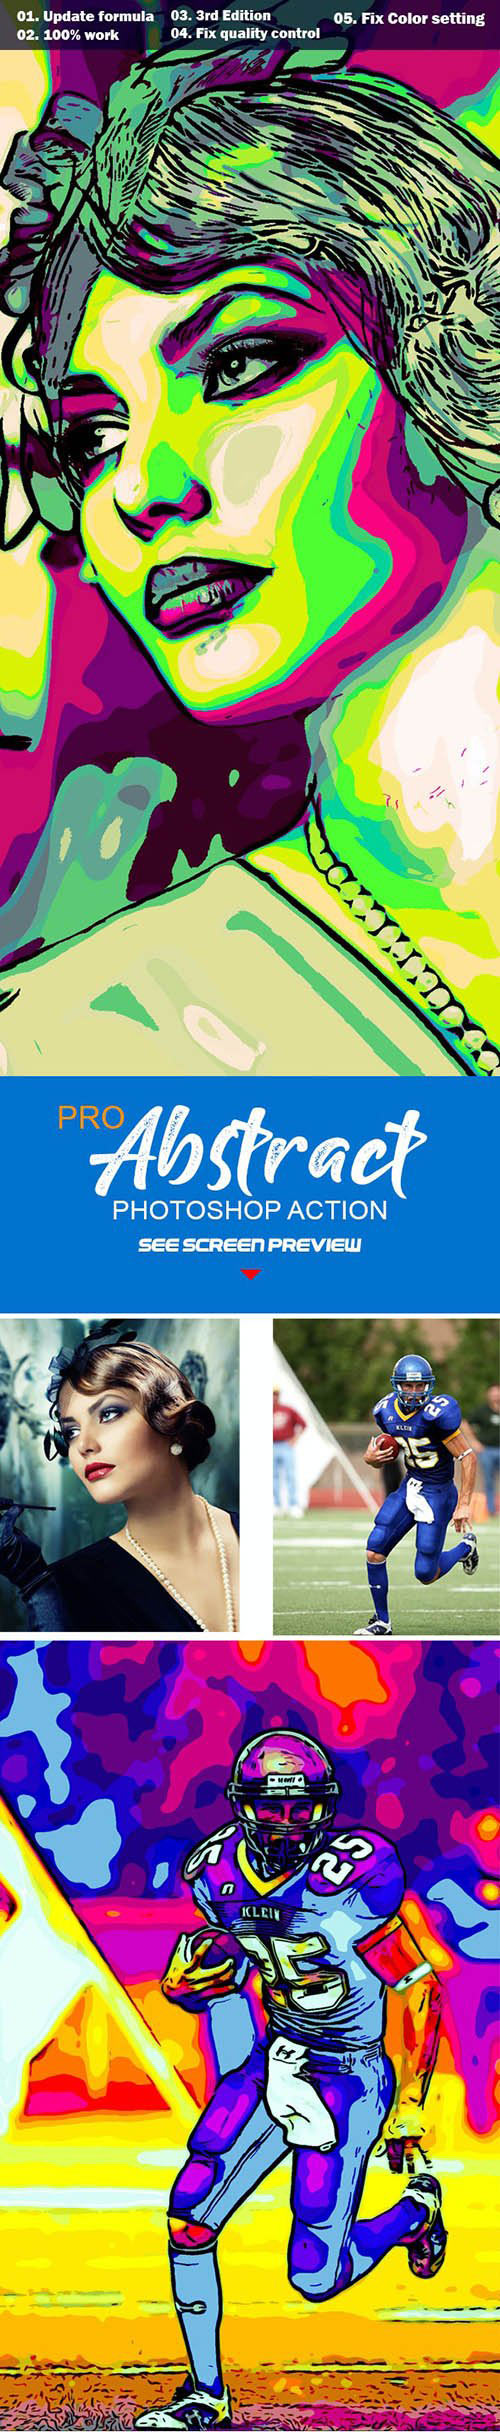 Pro Abstract Photoshop Action 27540213